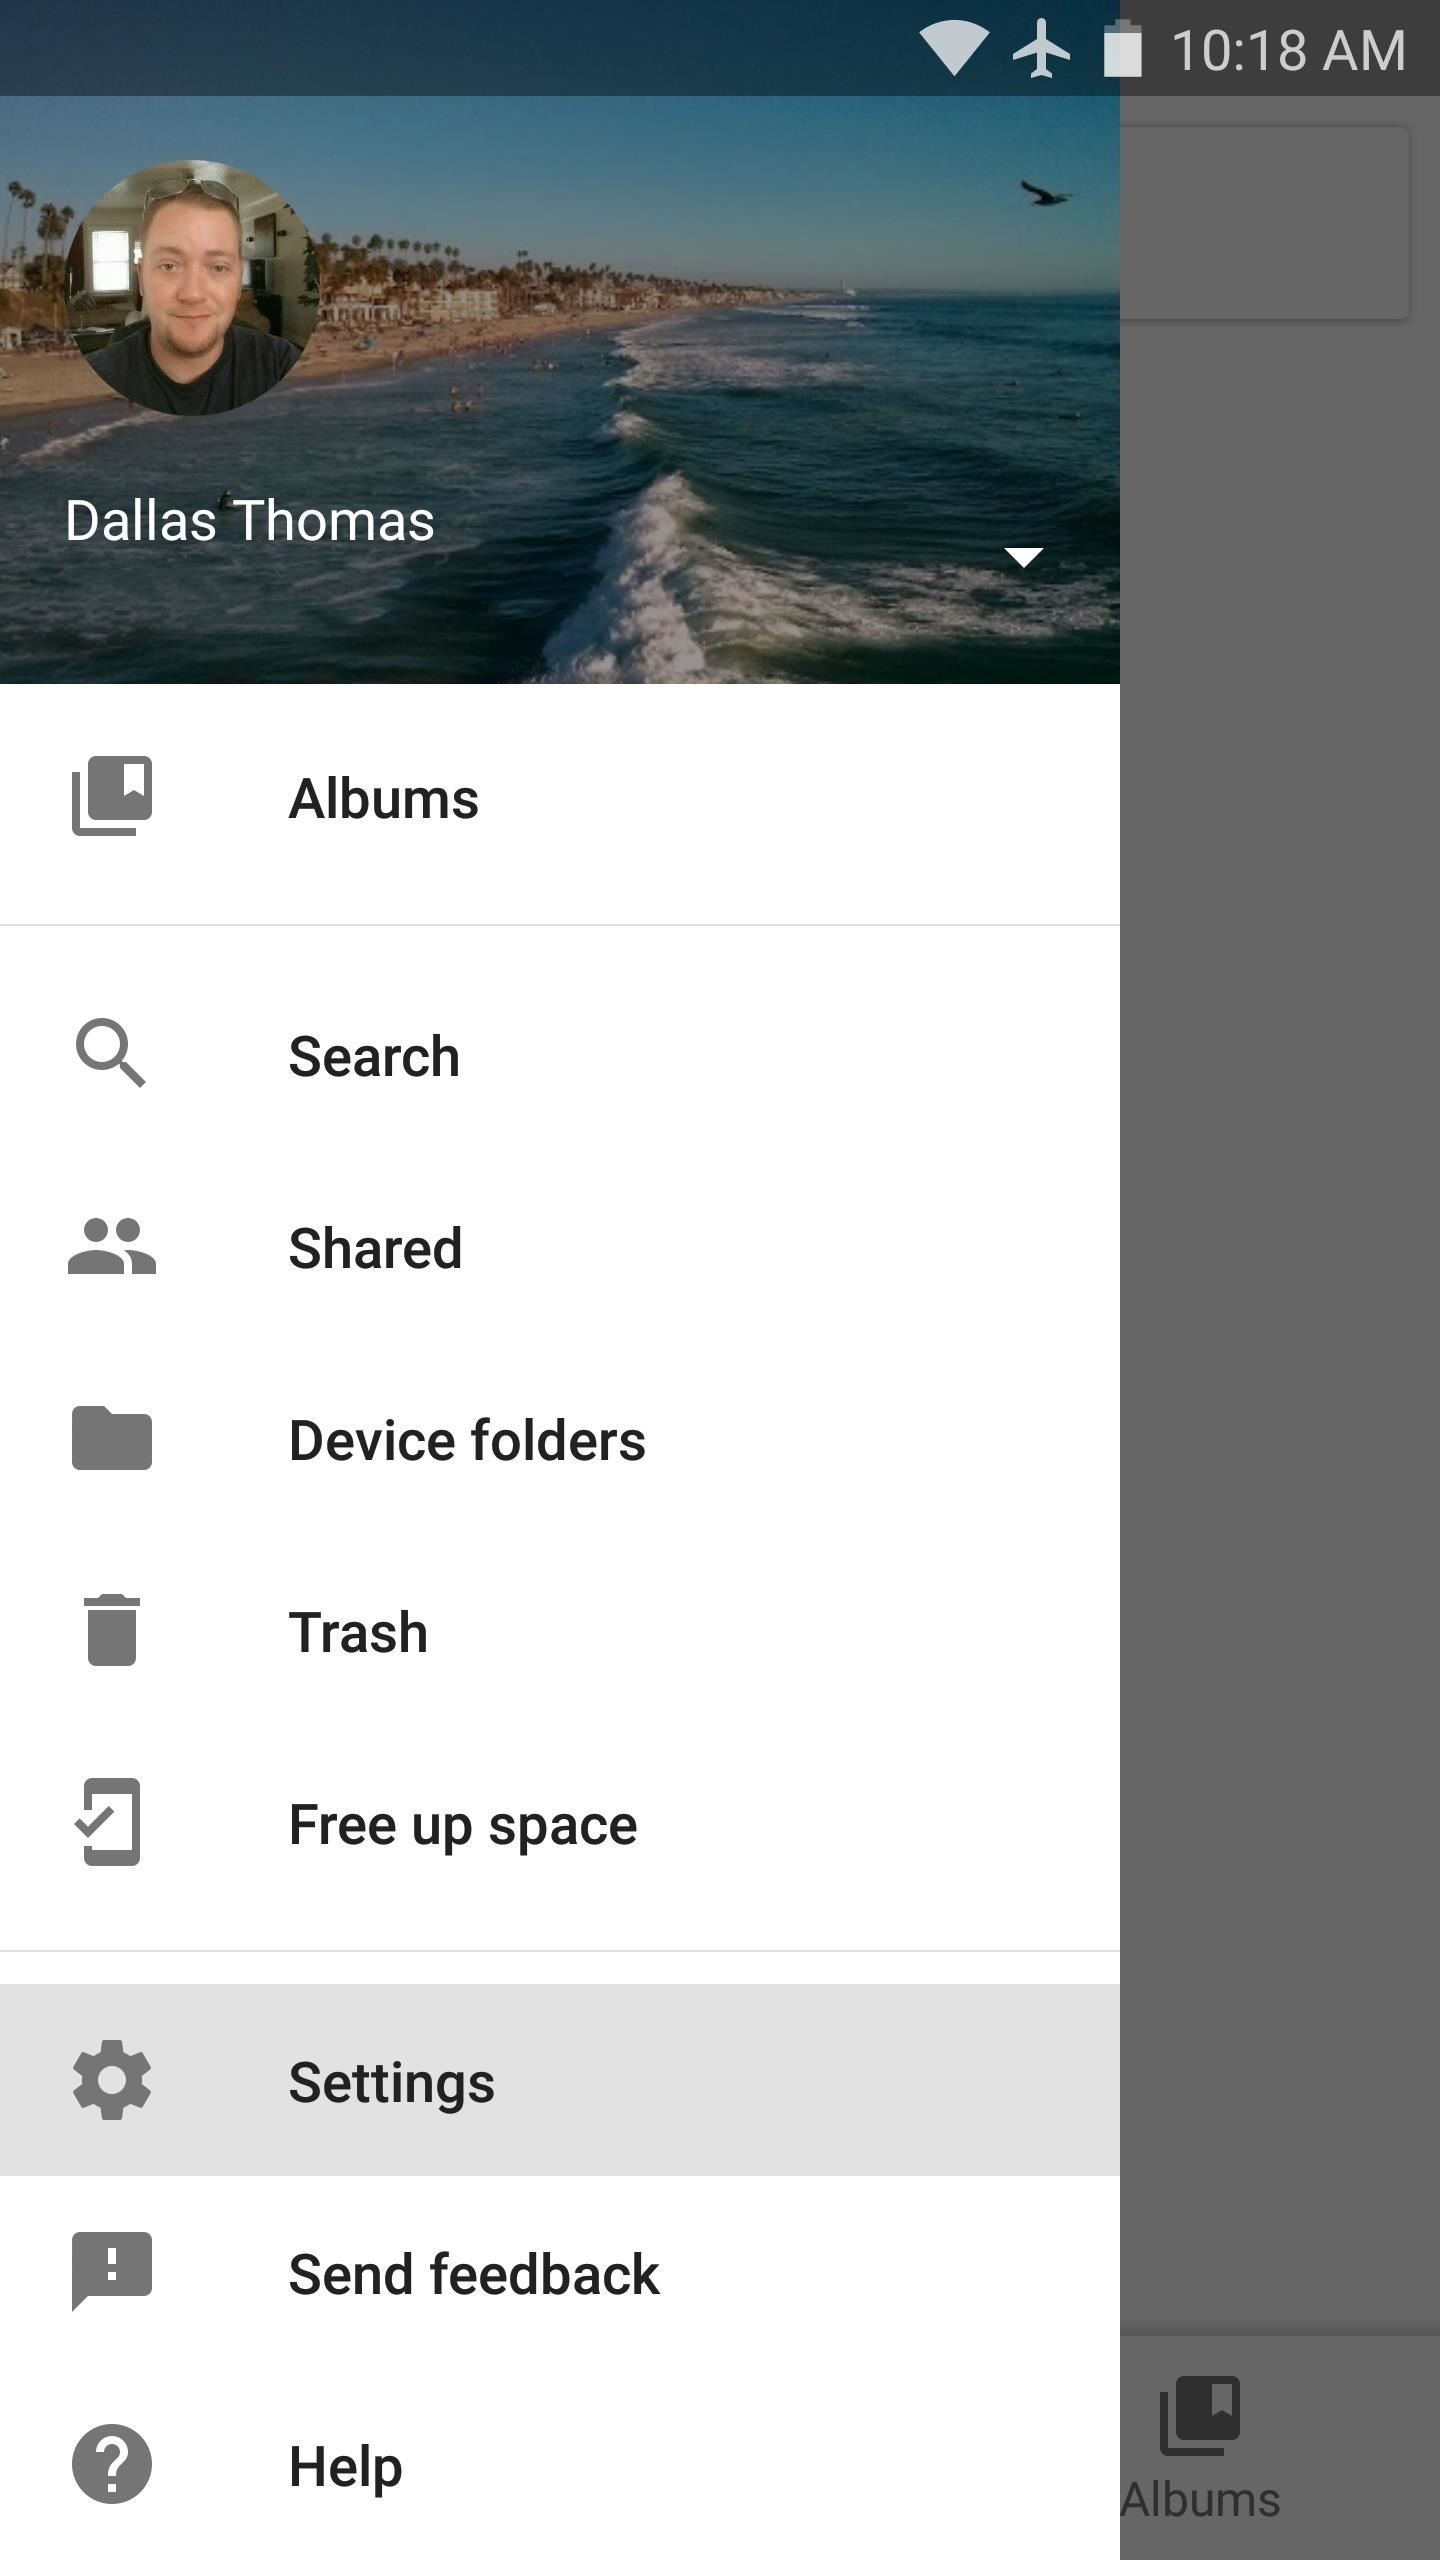 How to Add a Google Photos Shortcut to Your Android's Camera App